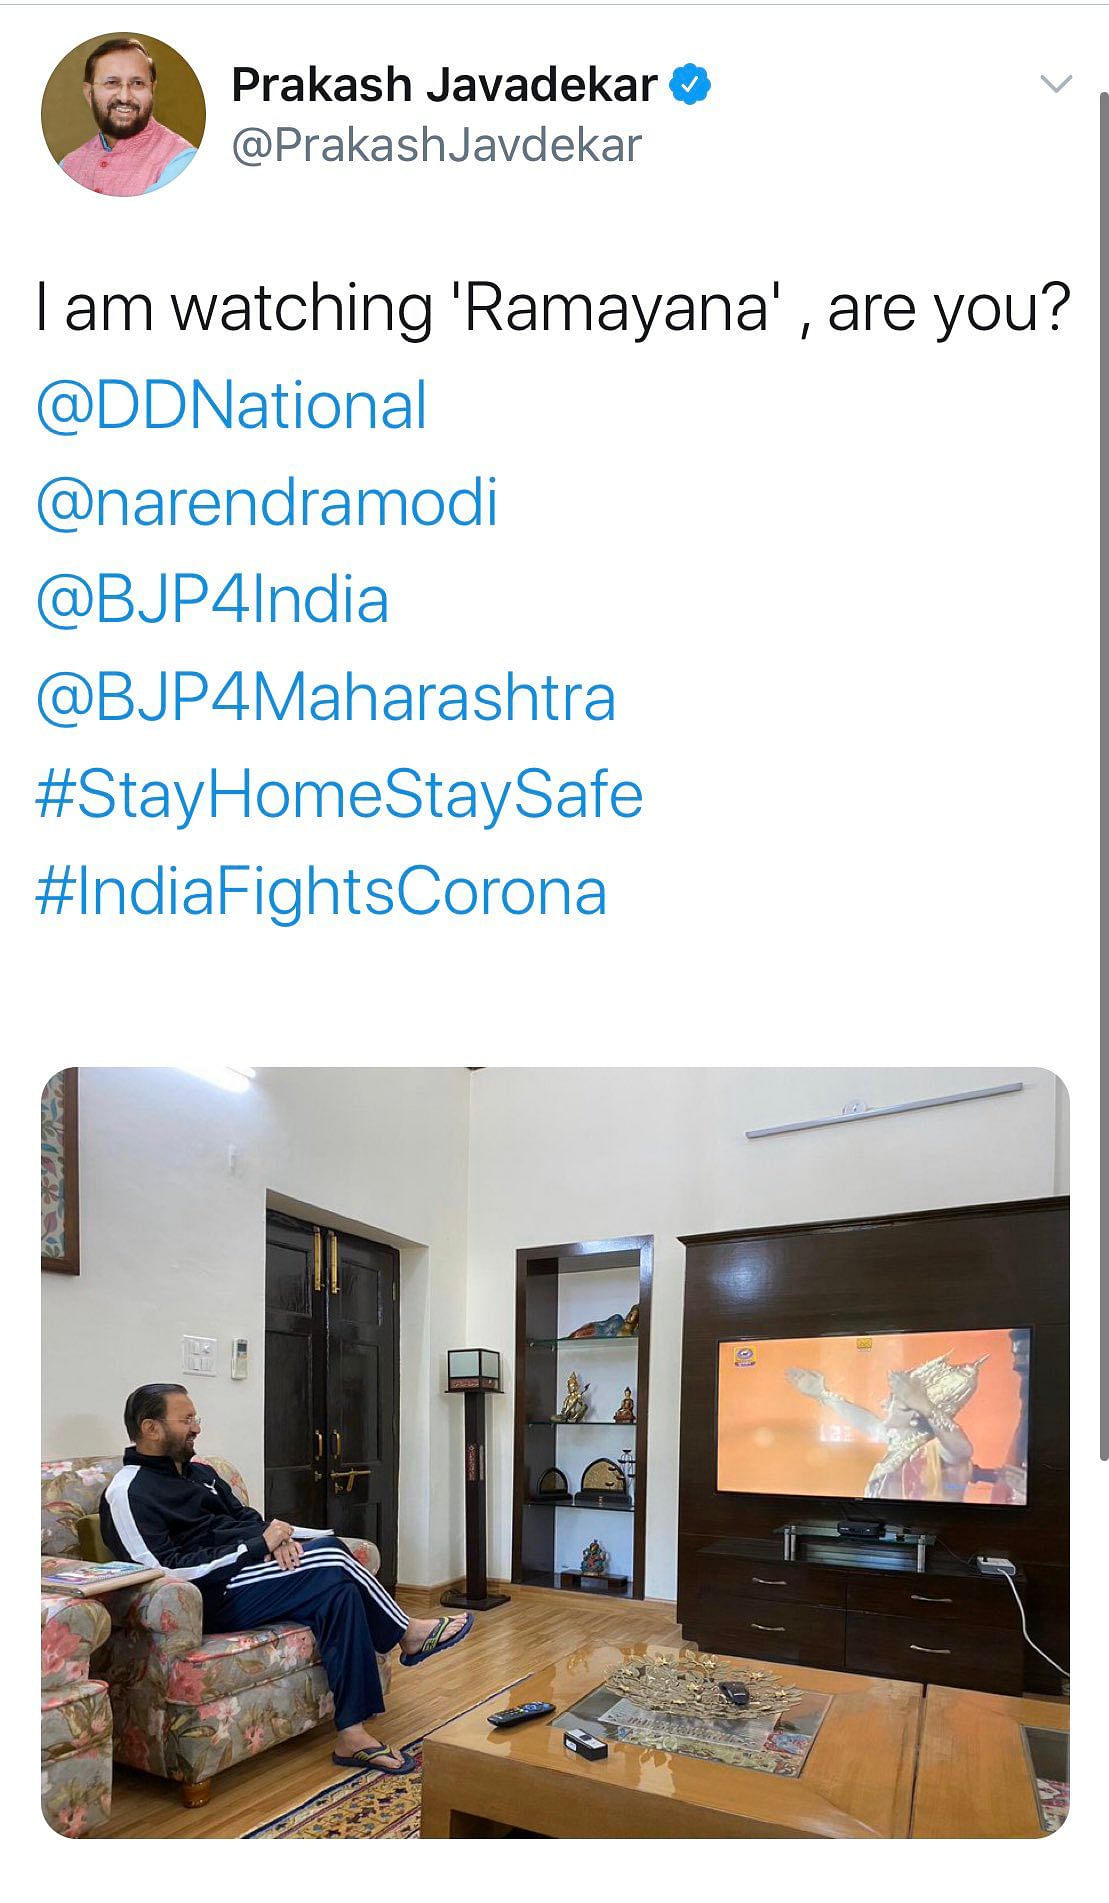 Following massive trolling, the Union minister deleted the tweet and posted a picture of him working from home.